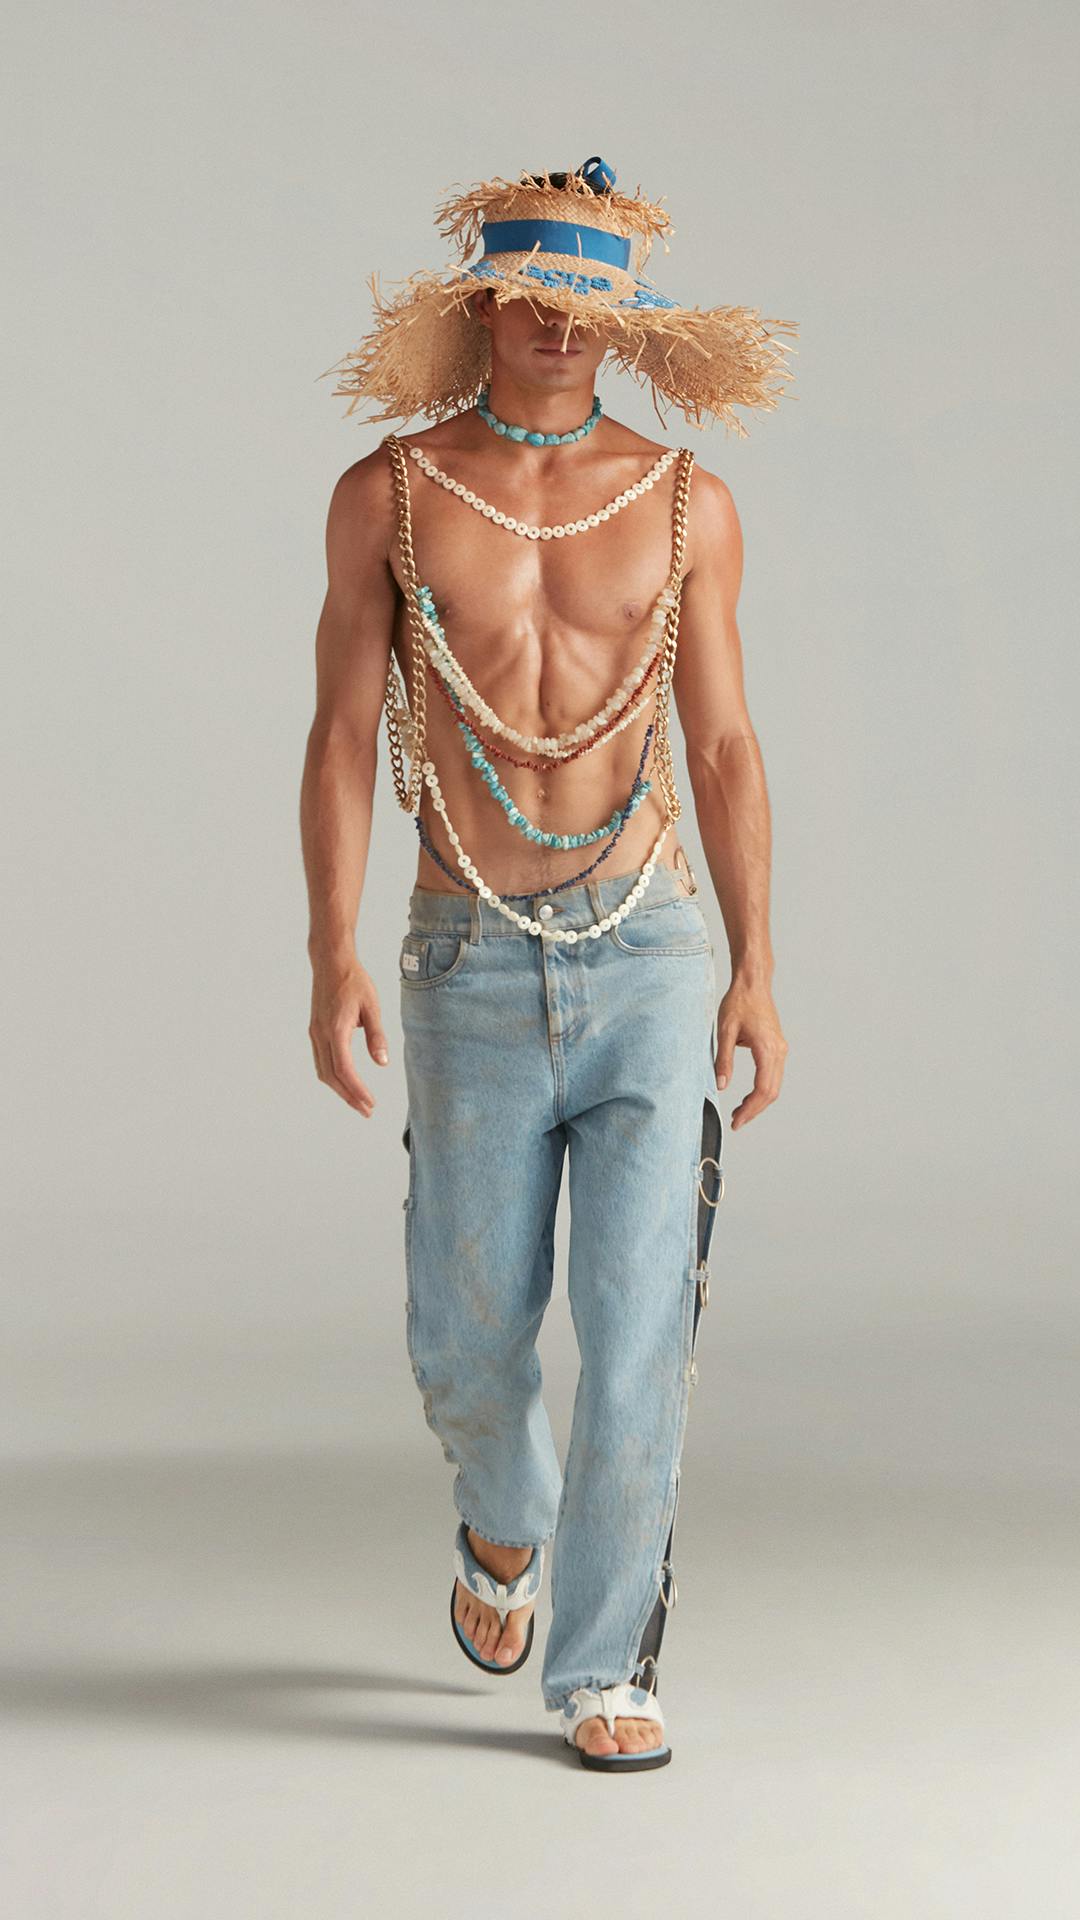 SUMMER LOOK WITH LATERAL-EMBELLISHED DENIM, STRAW HAT AND HAND-MADE CHAIN VEST